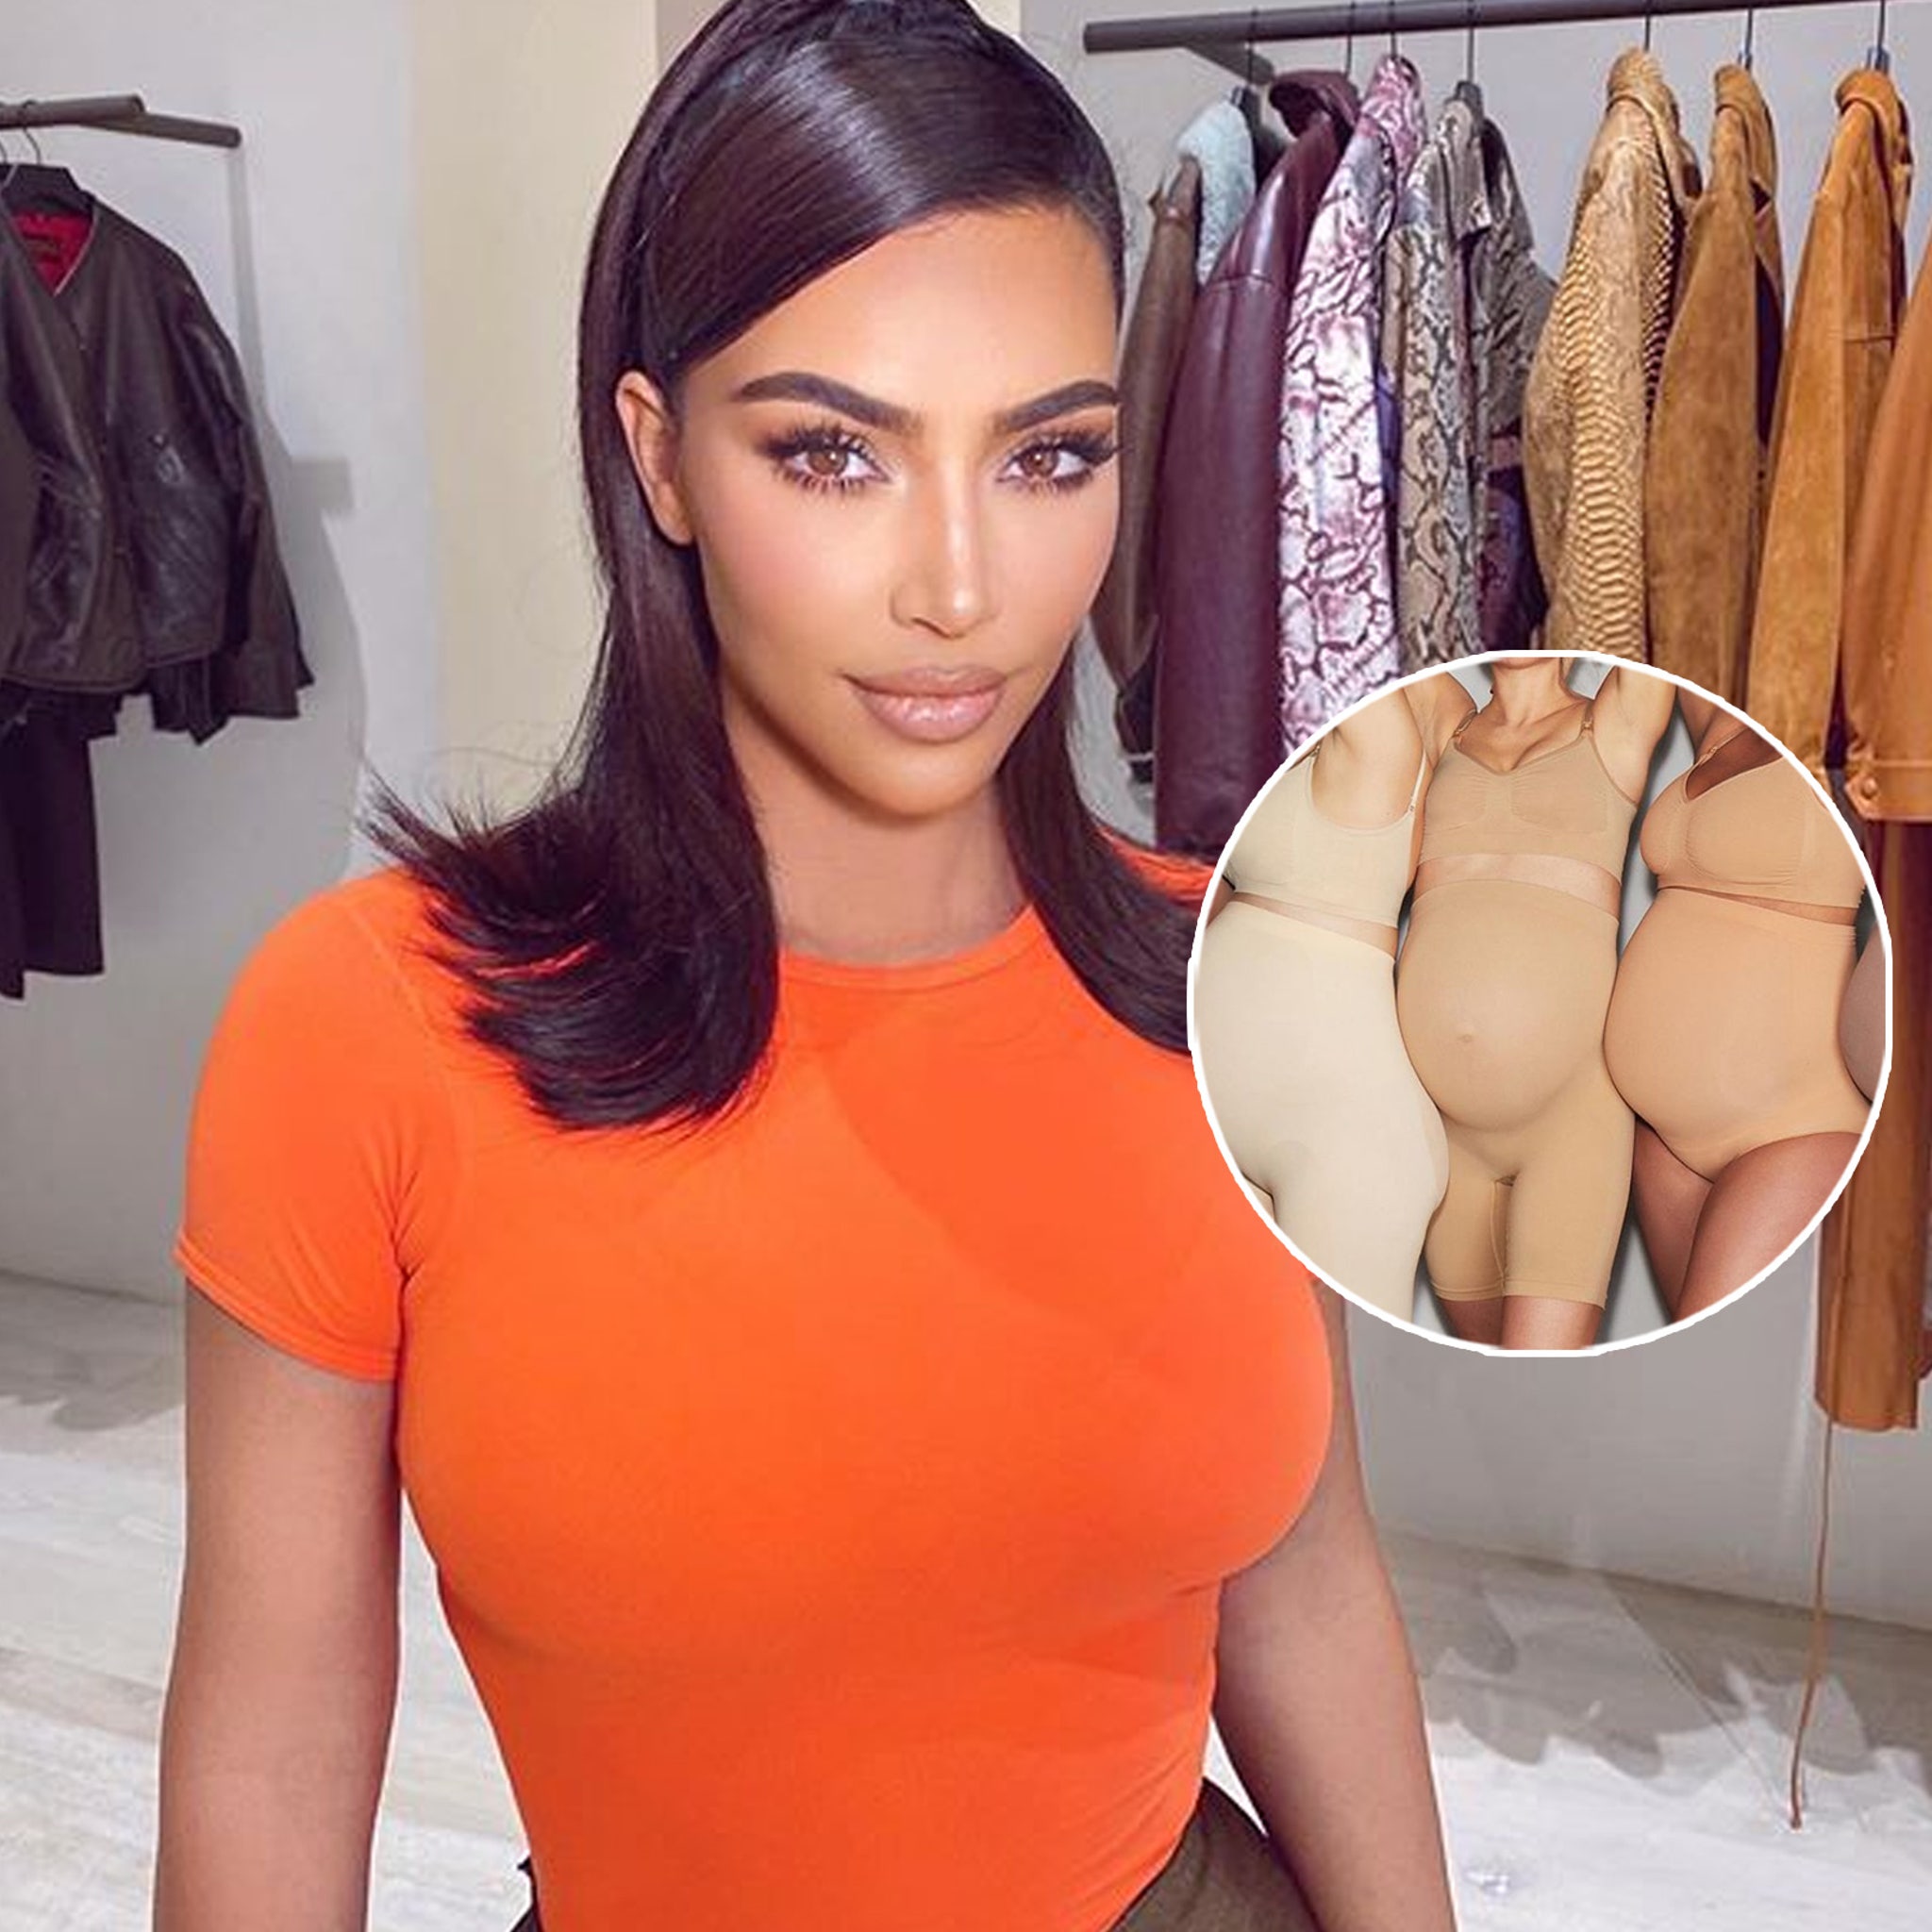 Even Kim Kardashian wears Spanx so we can all feel better about ourselves